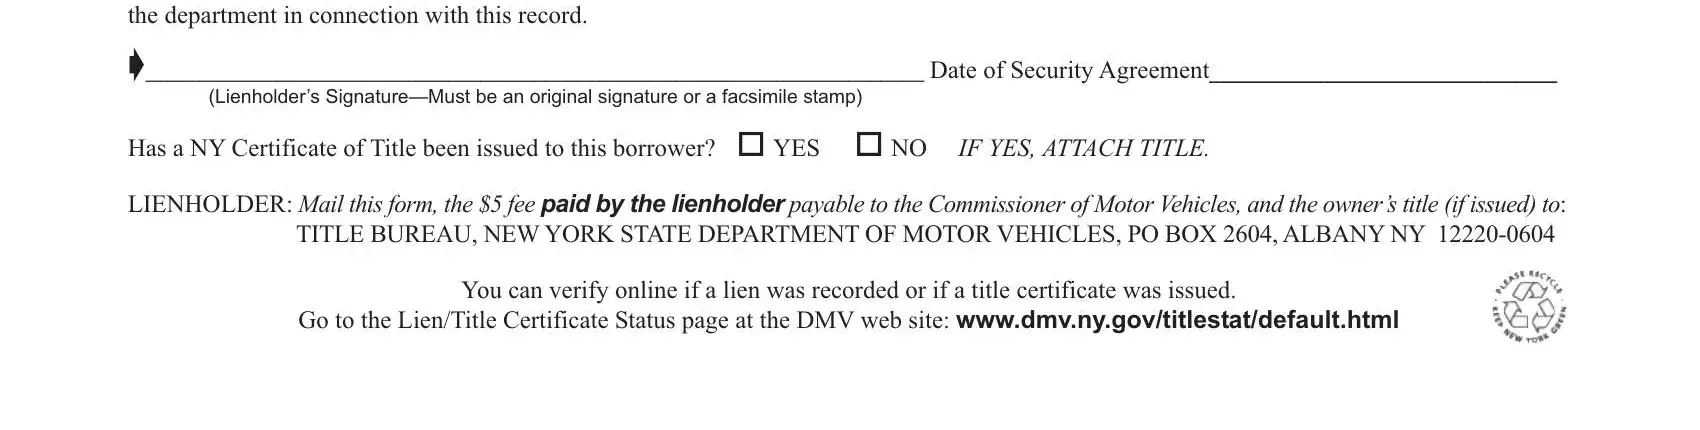 stage 3 to filling out mv900 ny form